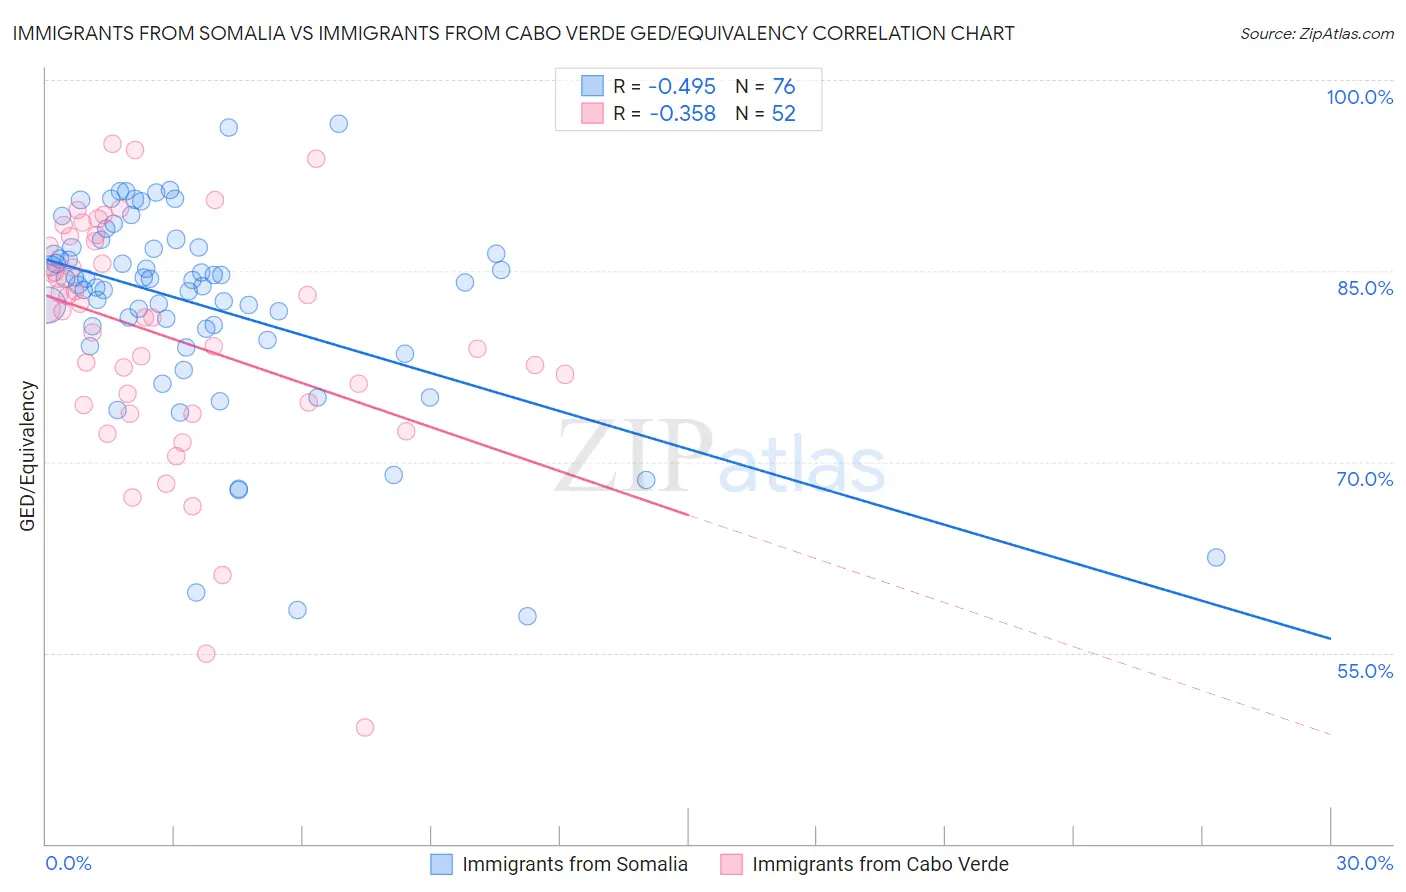 Immigrants from Somalia vs Immigrants from Cabo Verde GED/Equivalency